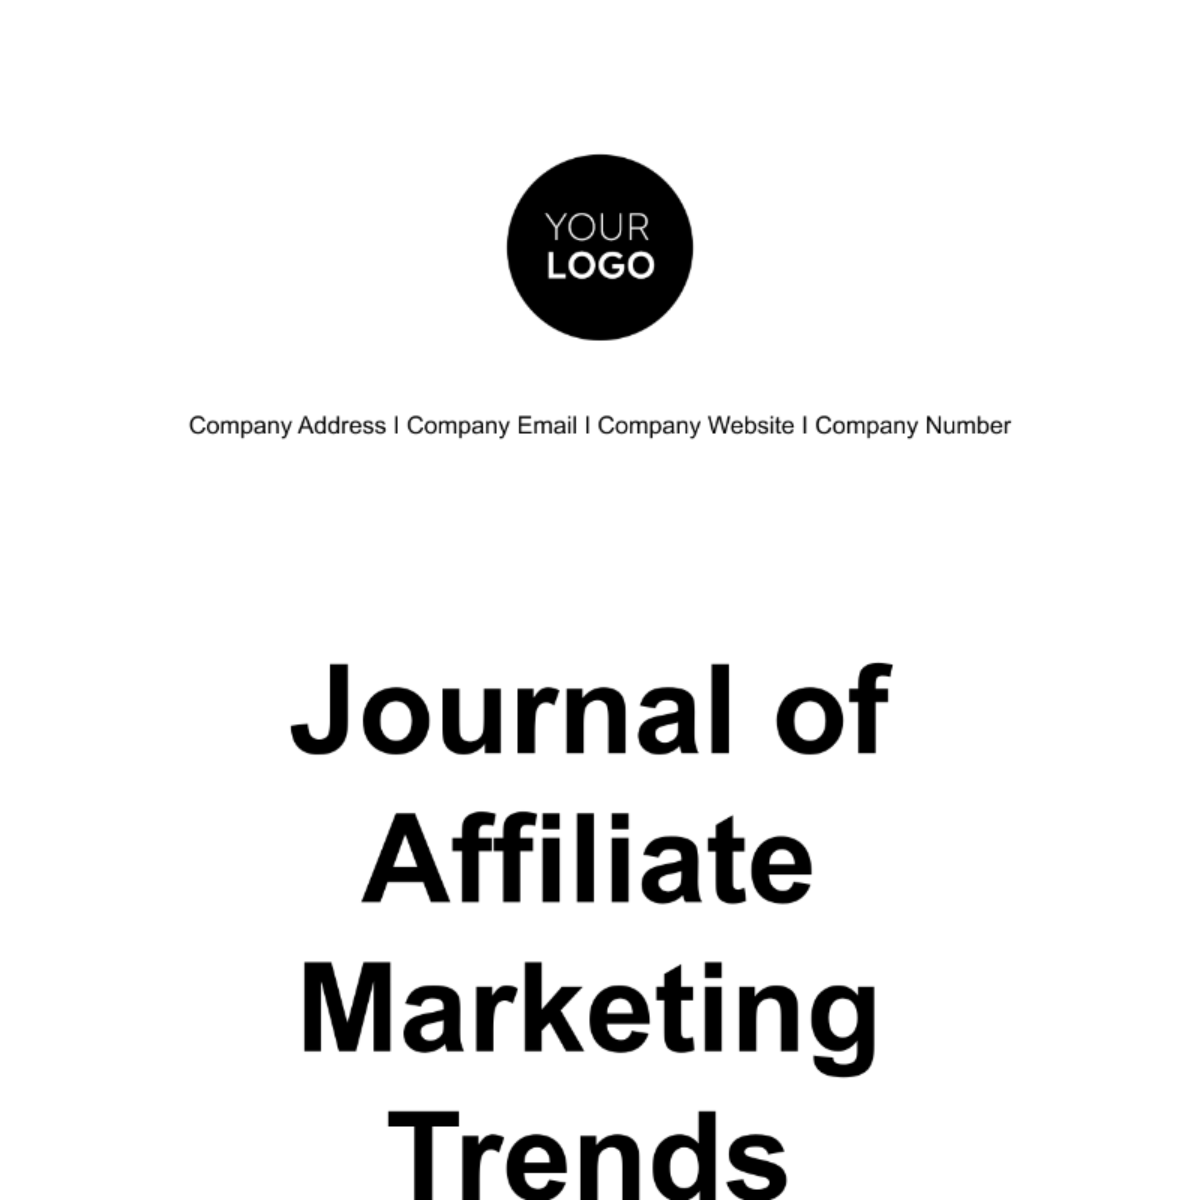 Journal of Affiliate Marketing Trends Template